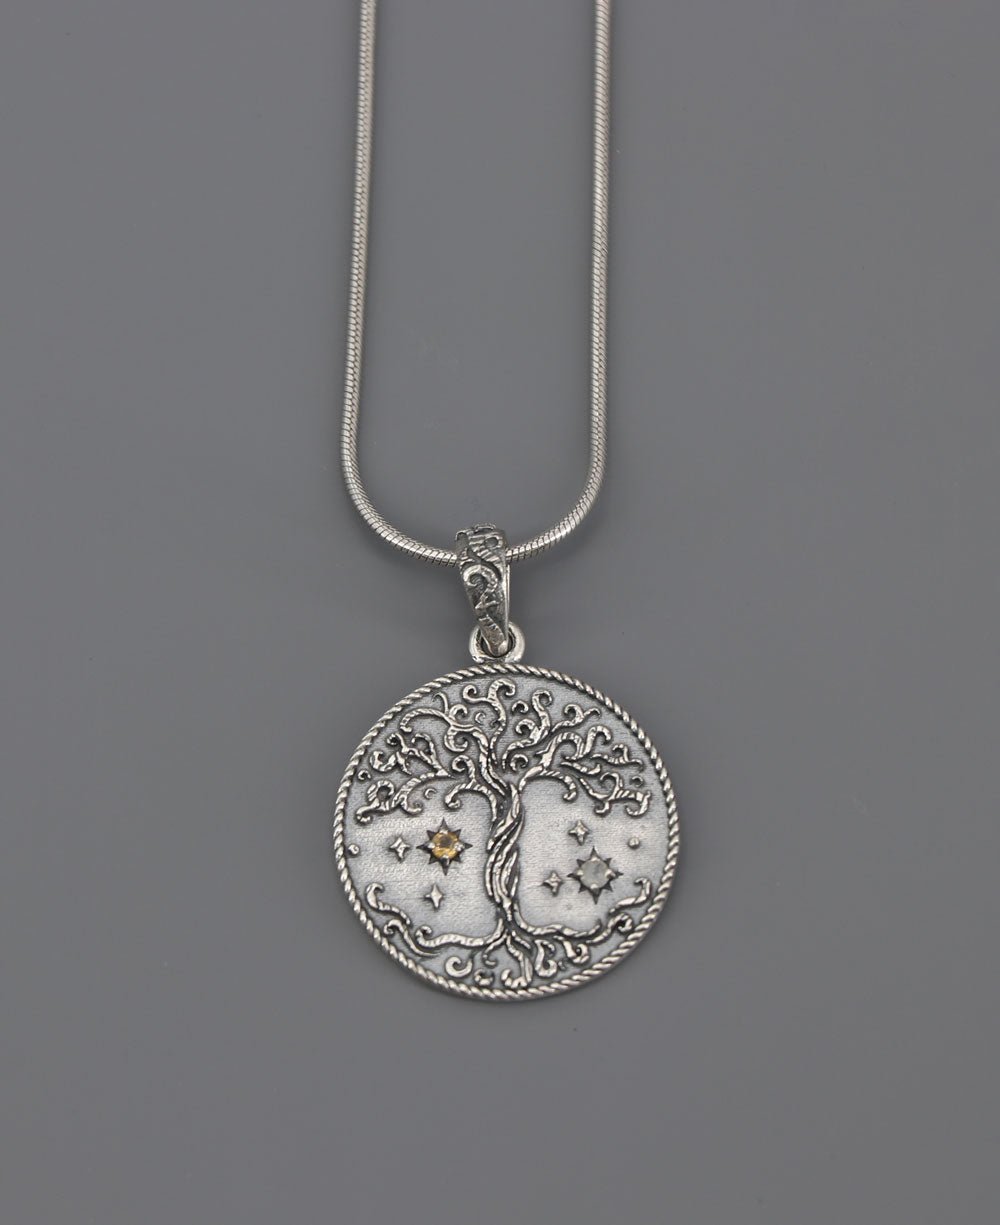 Celestial Tree of Life Sterling Silver Necklace - Necklaces 16 Inches